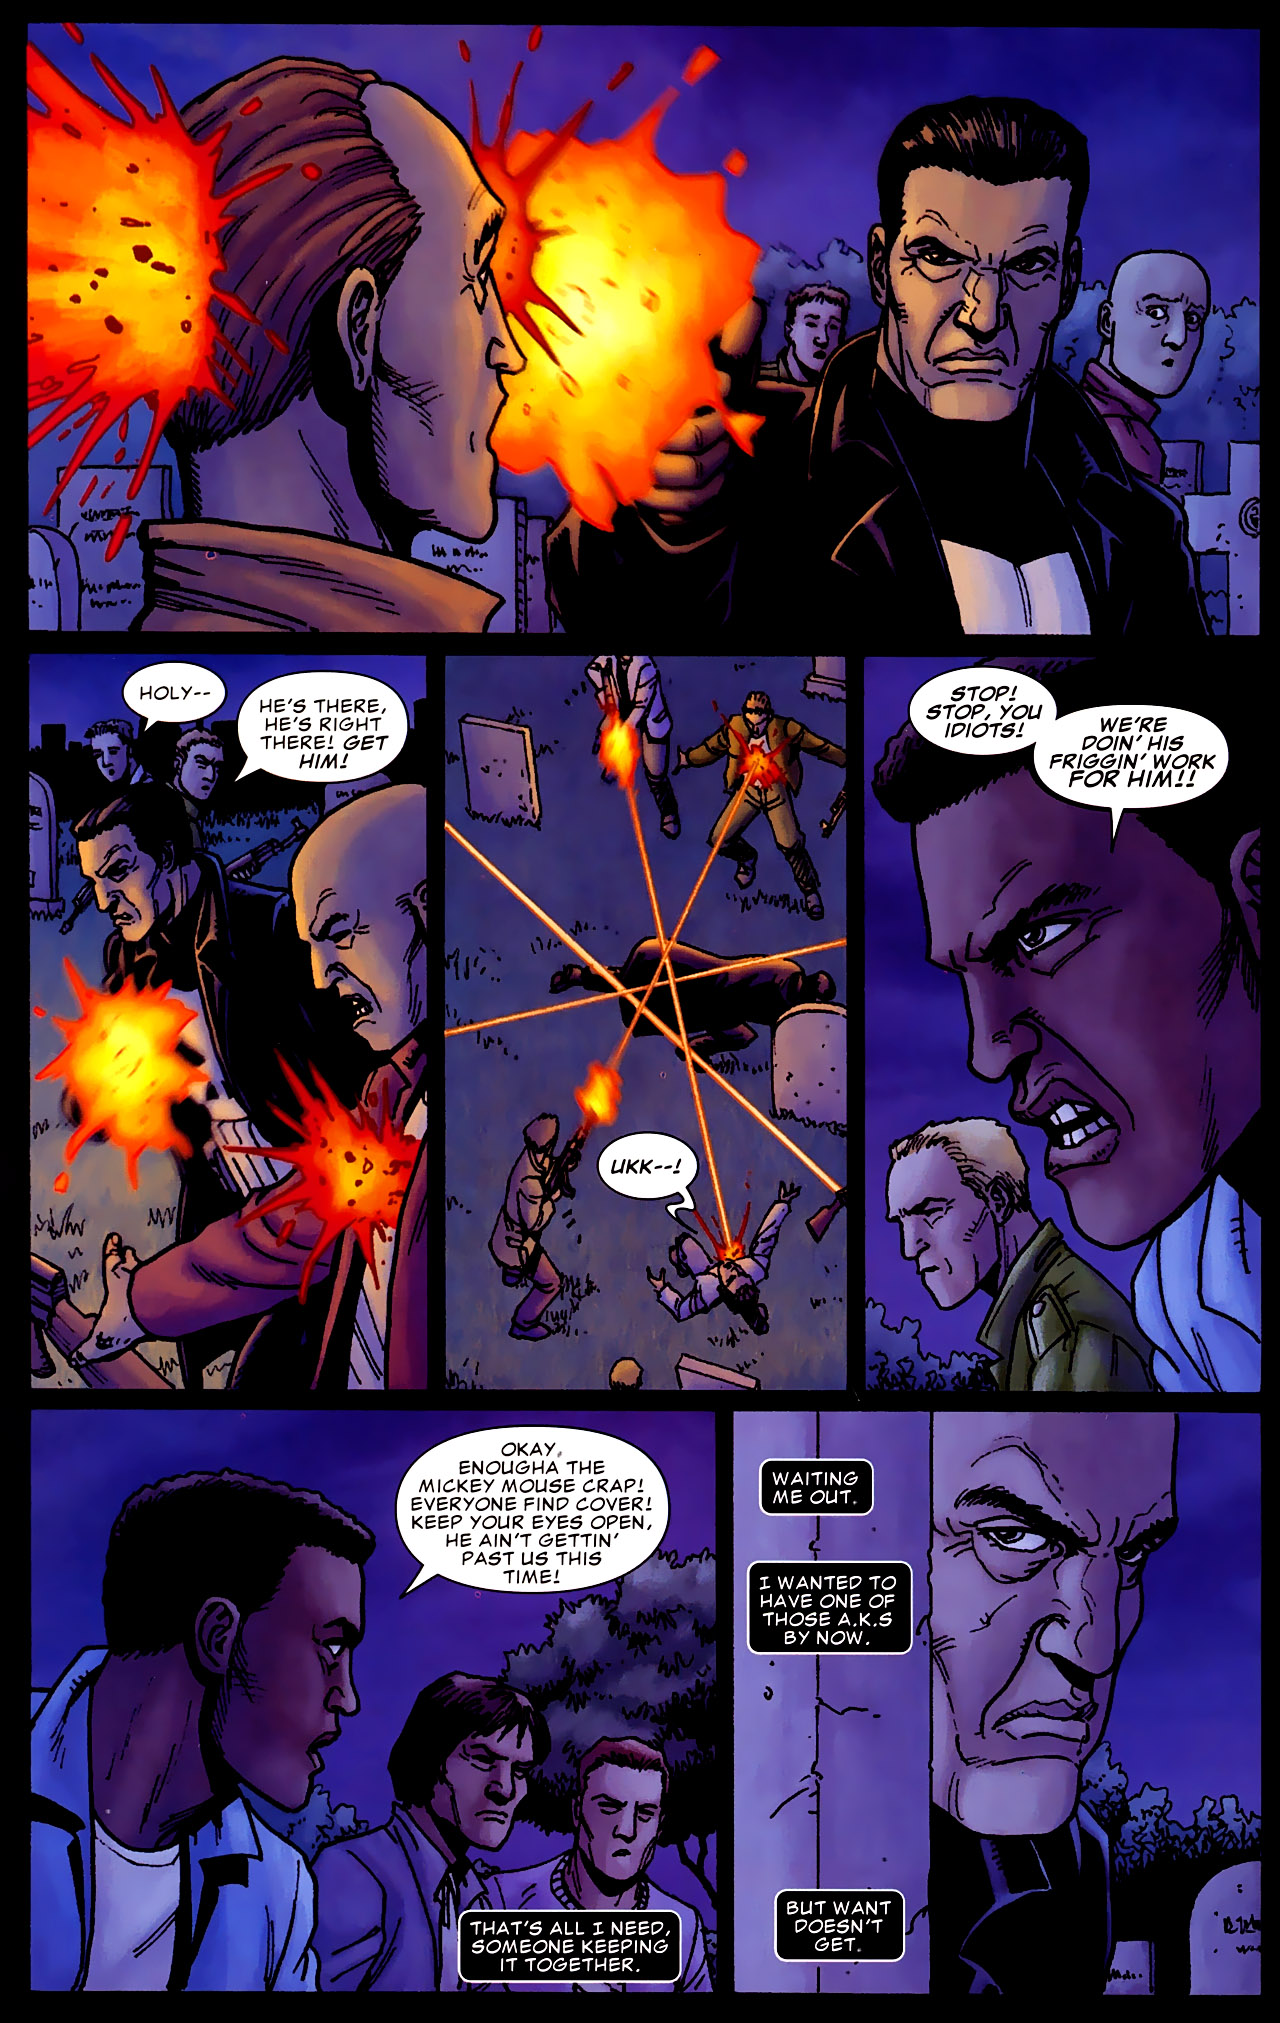 Punisher War Zone 09 Issue 3 Read Punisher War Zone 09 Issue 3 Comic Online In High Quality Read Full Comic Online For Free Read Comics Online In High Quality